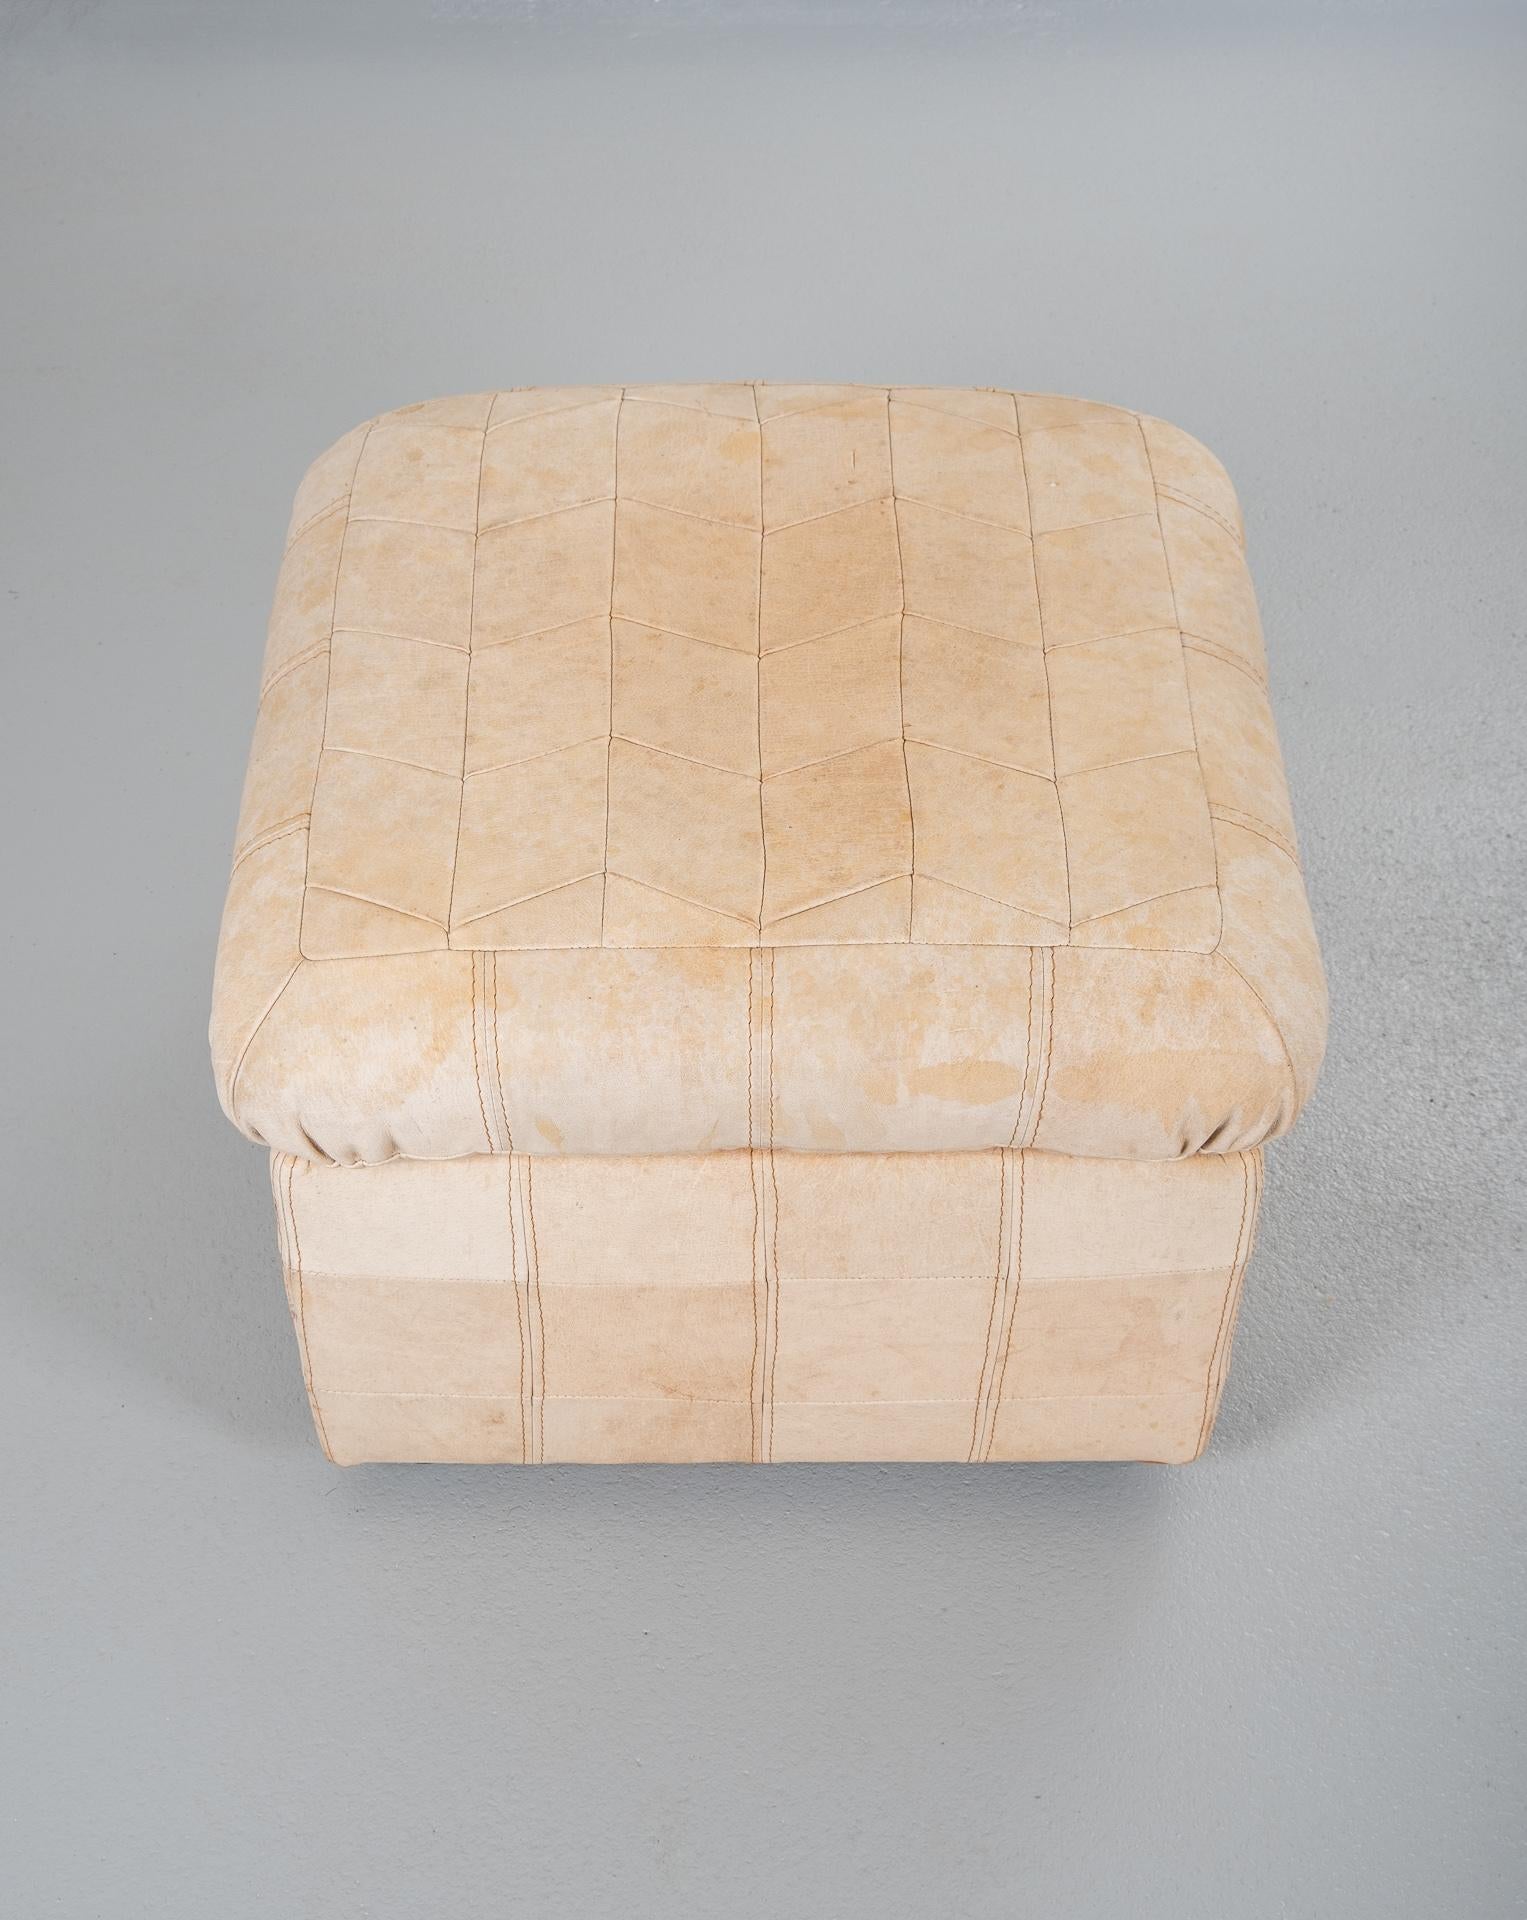 Leather Patchwork Pouf, 1970s In Good Condition For Sale In Den Haag, NL